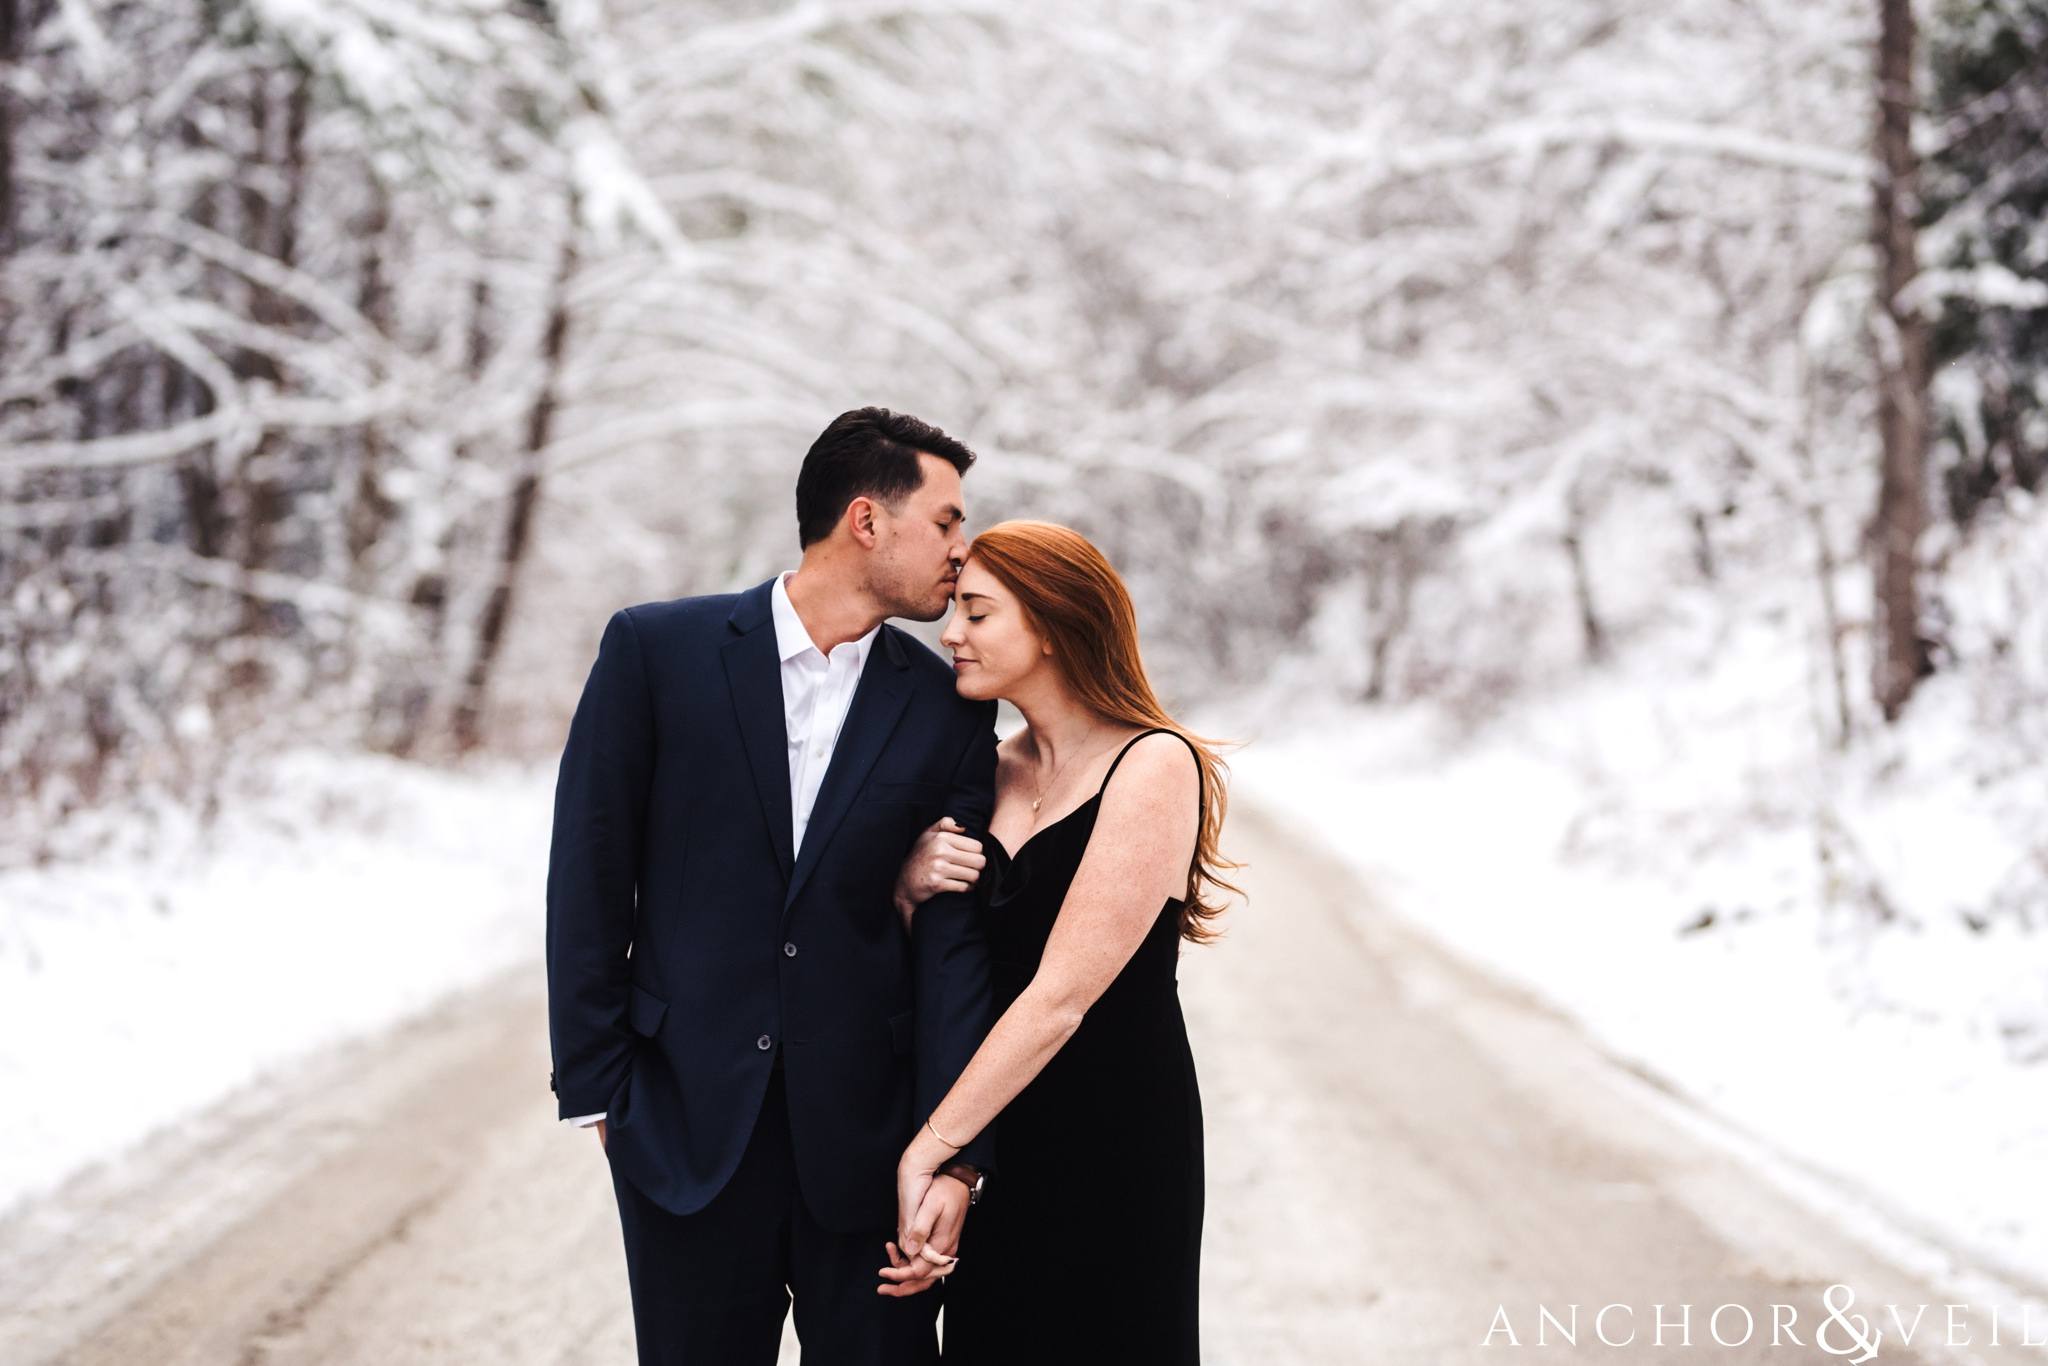 kissing her on the forehead during their Snowy Asheville Engagement Session